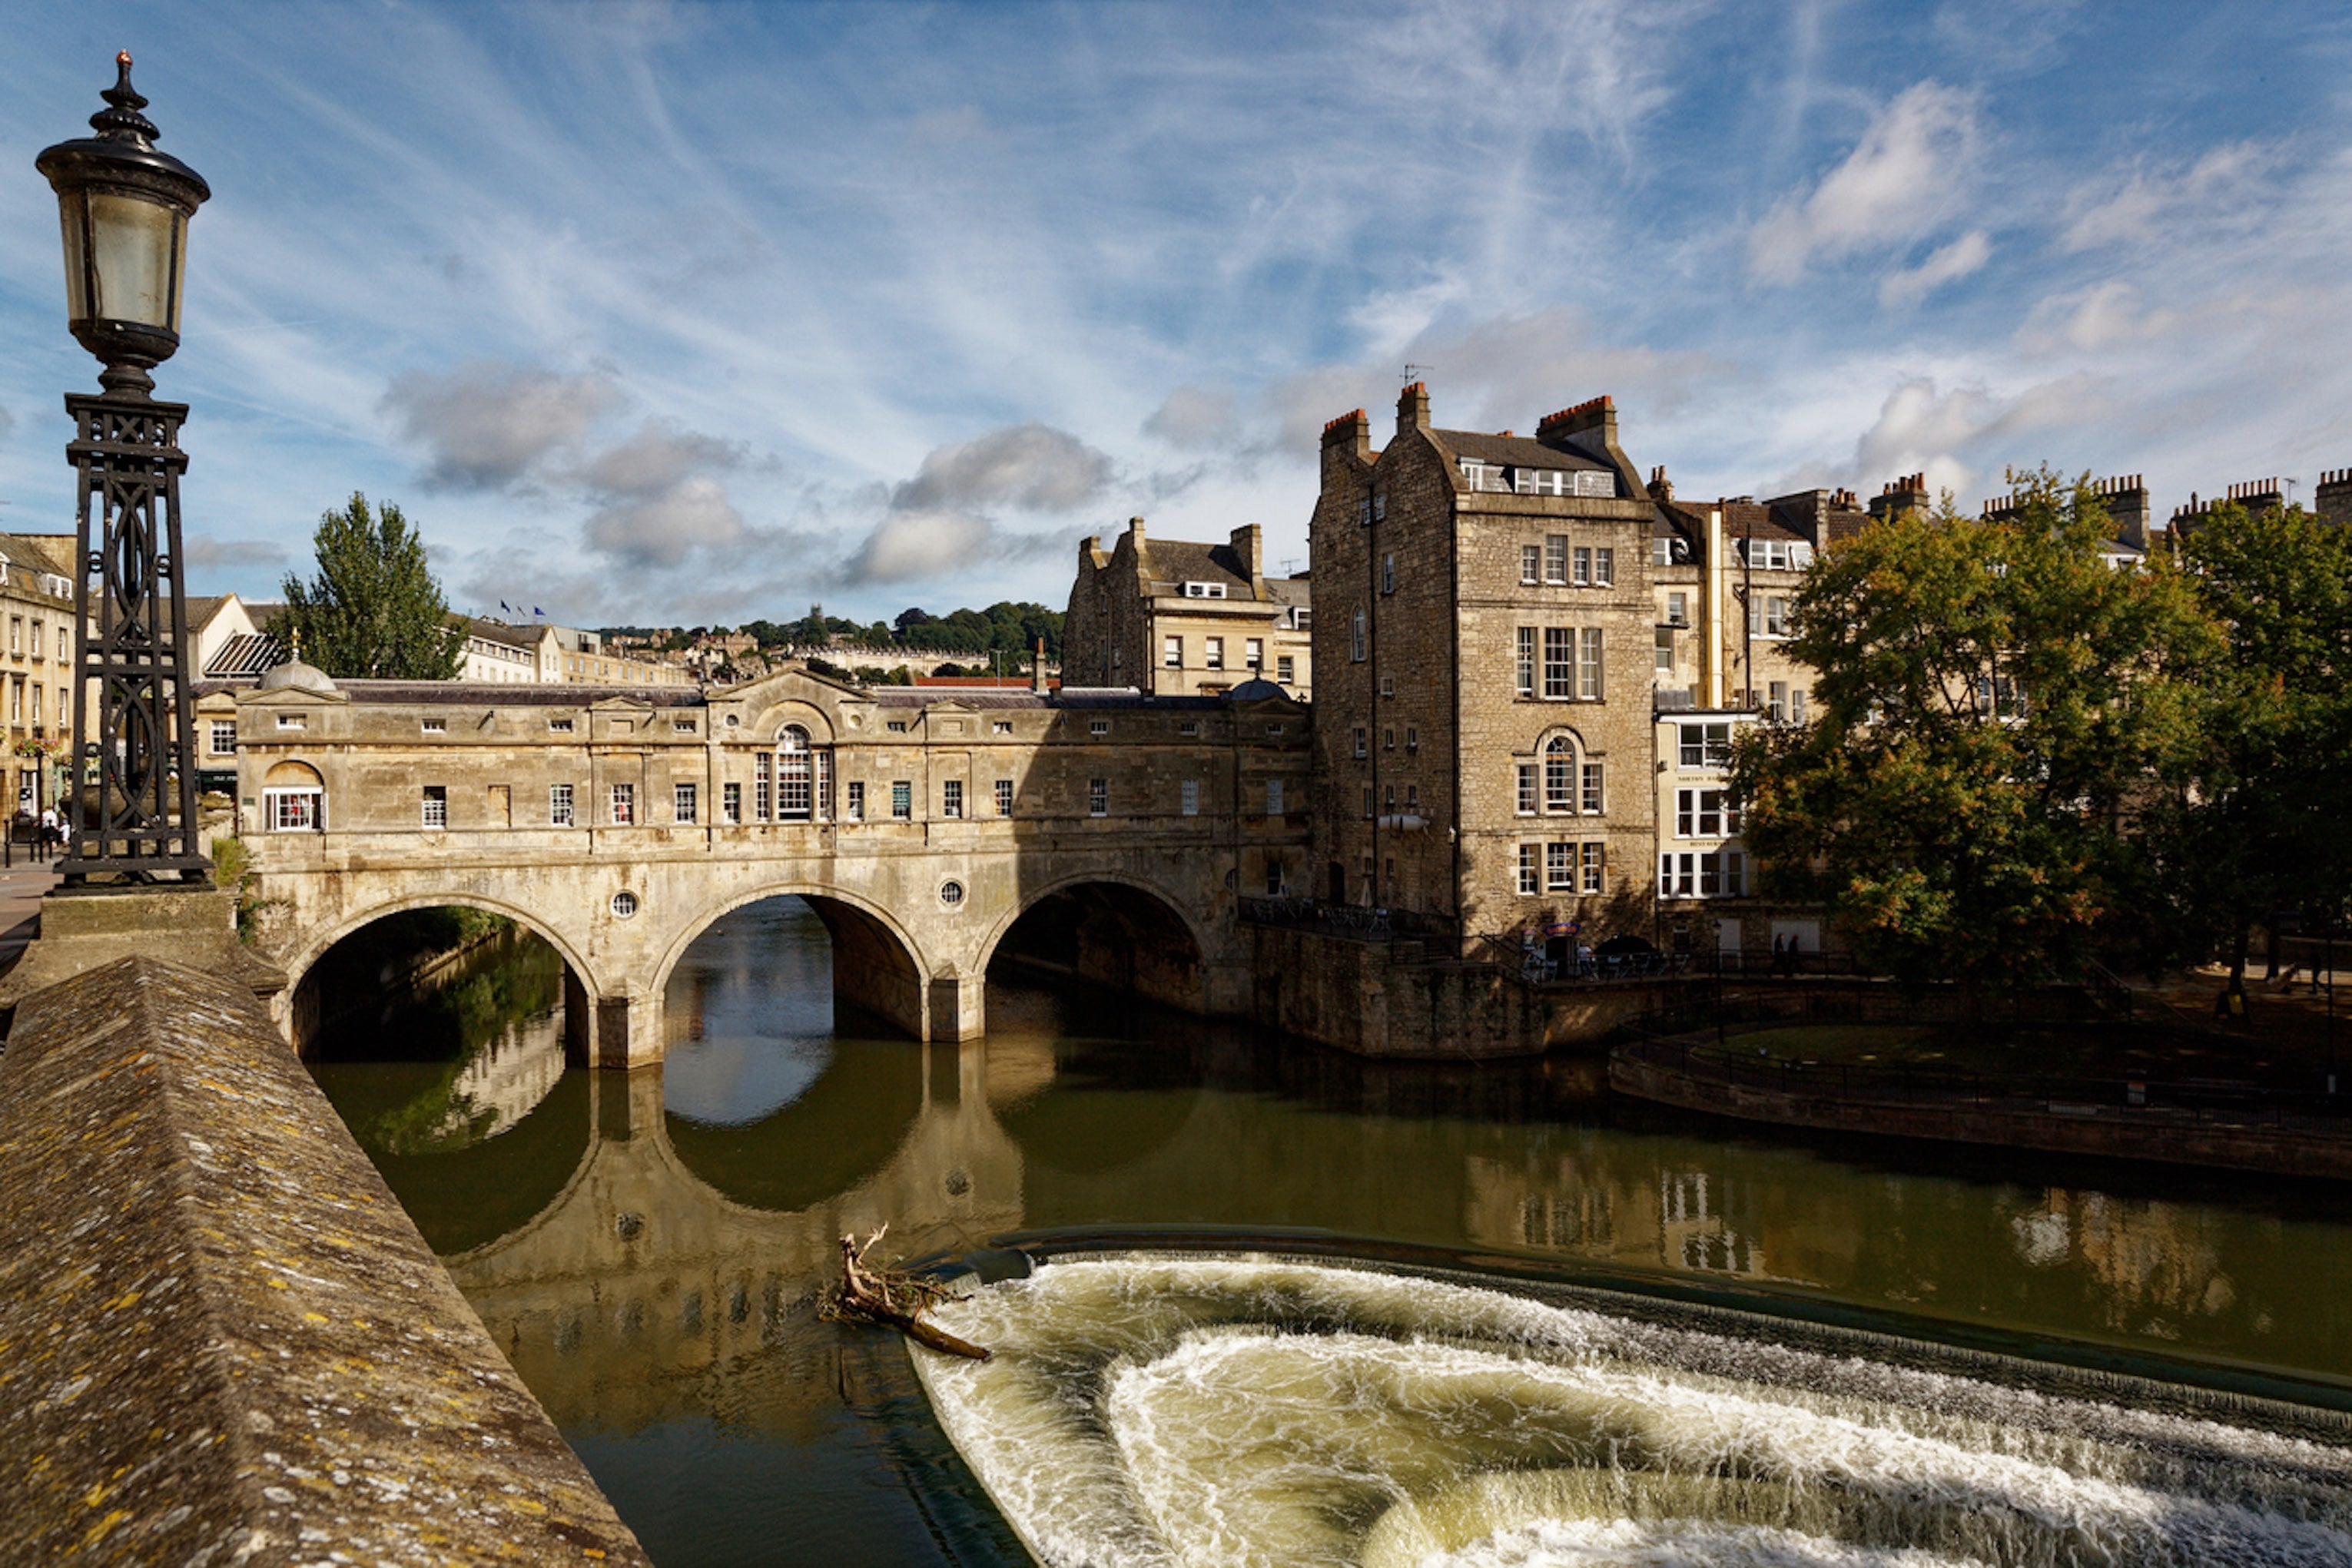 Bath may be Britain’s best-known Georgian spa town but there are other beautiful gems blessed with natural springs up and down the country